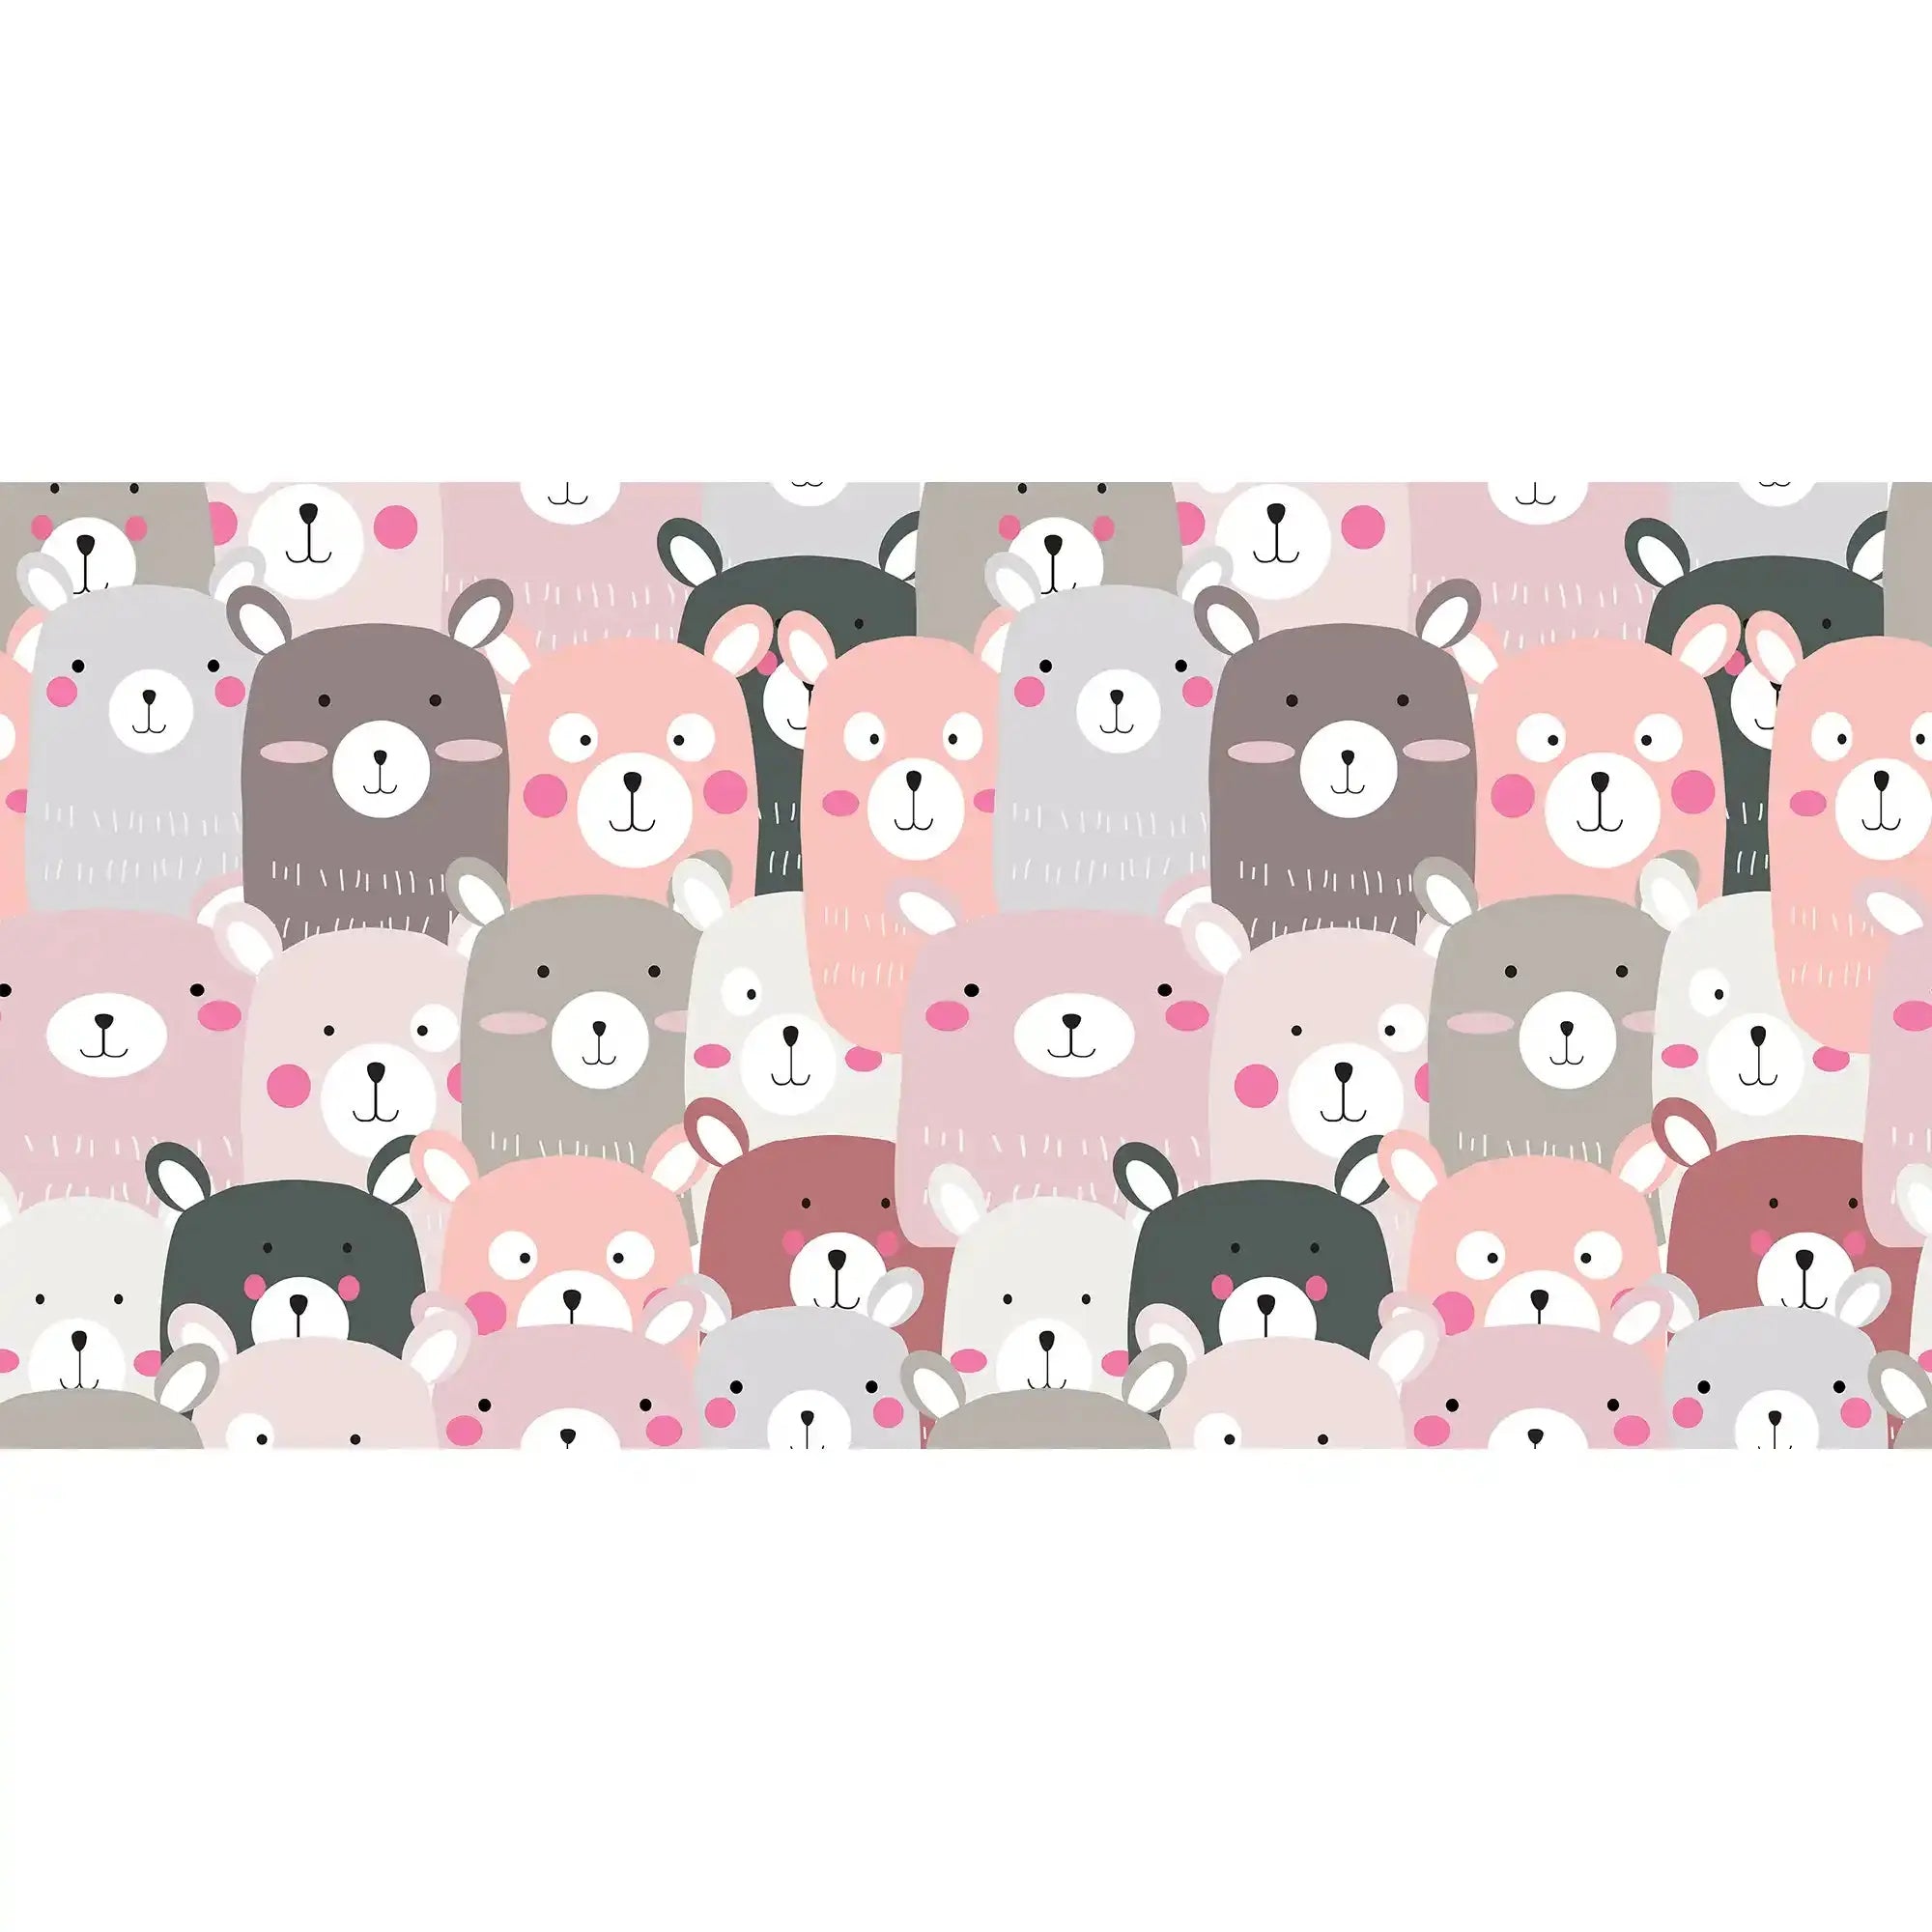 6004 / Adorable Bear Pattern Peel and Stick Nursery Wallpaper - Easy to Apply and Remove - Muted Colors for Kids Room Decor - Eco-Friendly and High Quality - Artevella